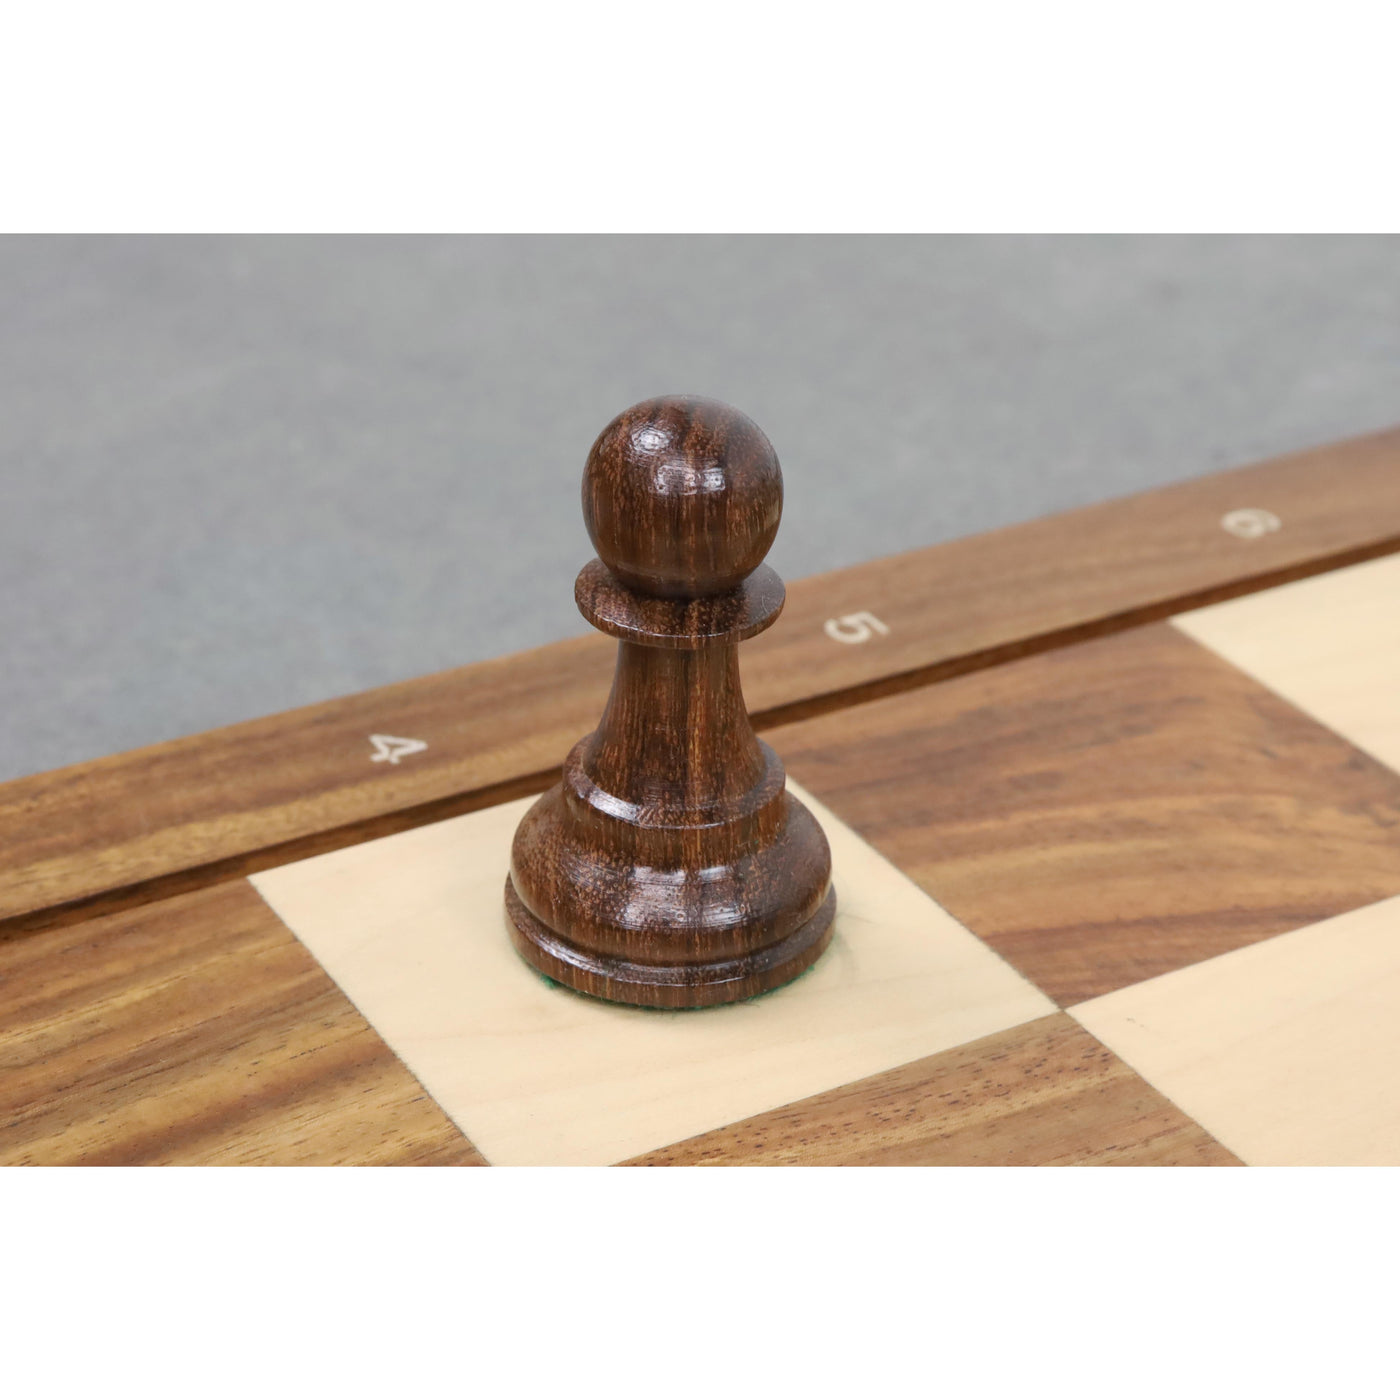 Slightly Imperfect Leningrad Staunton Chess Set - Chess Pieces Only - Golden Rosewood & Boxwood - 4" King